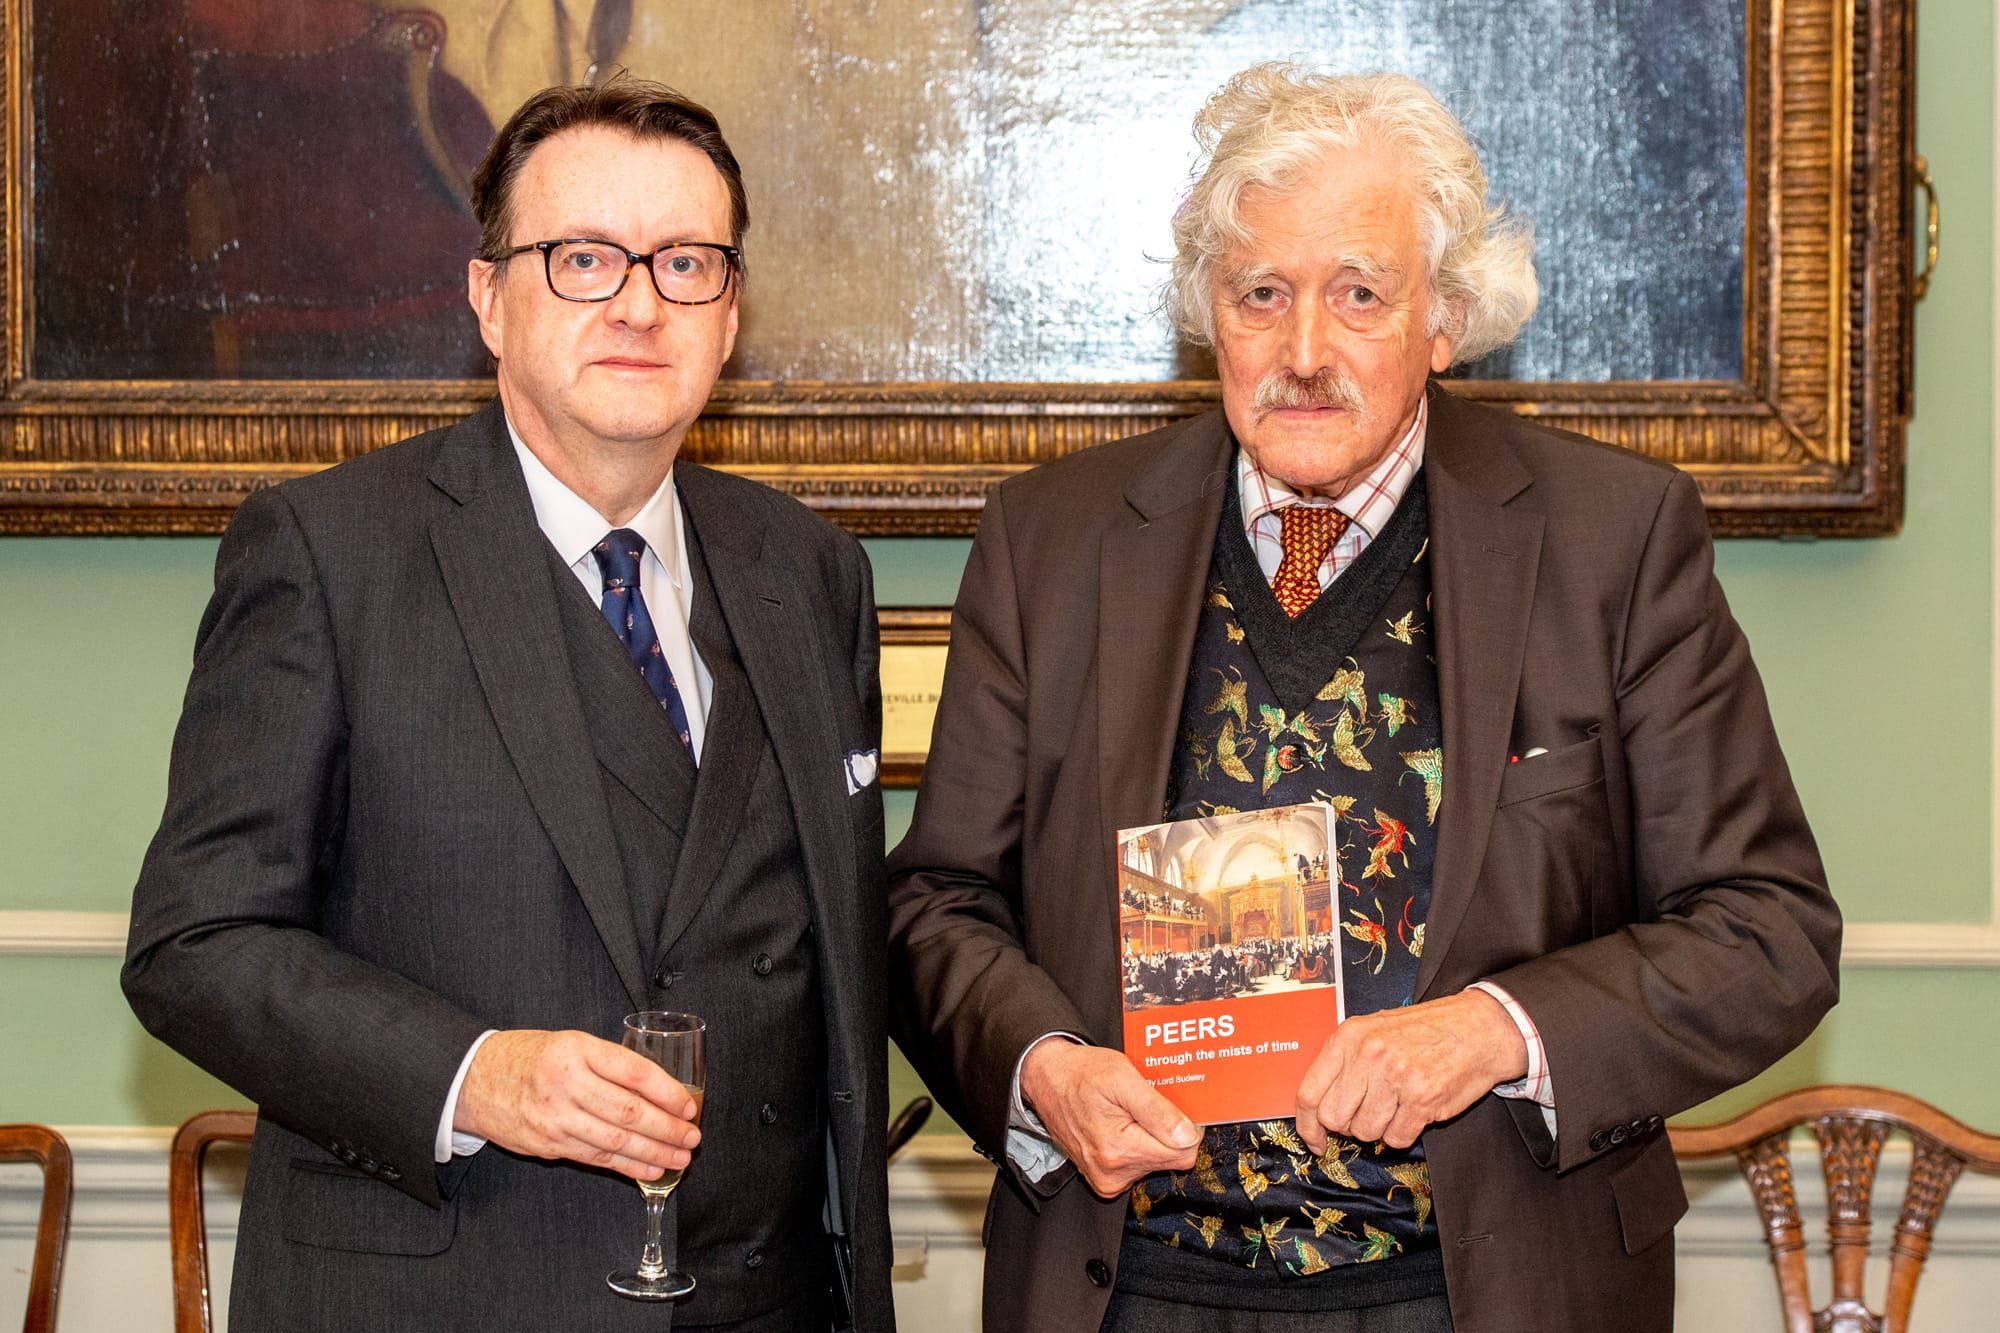 PEERS through the mists of time - Launch at Brooks's Club, London.